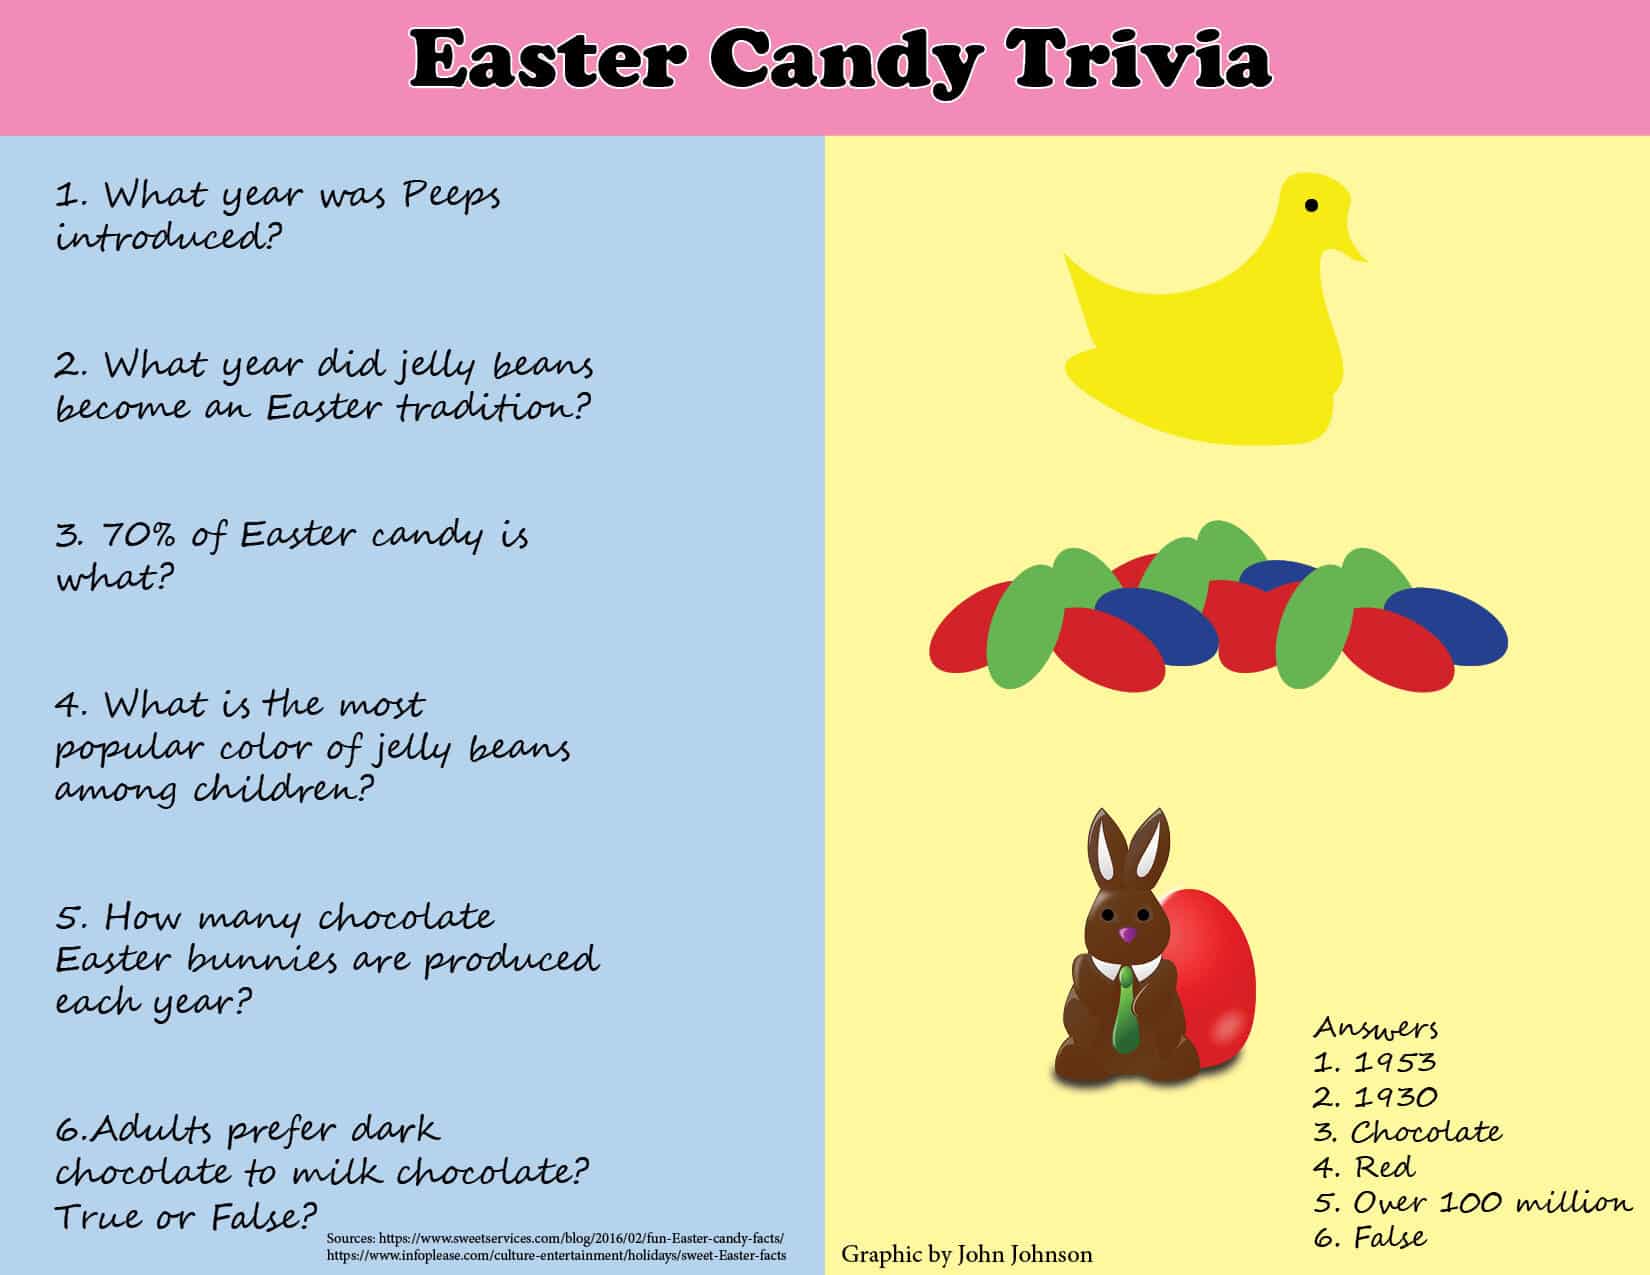 How well do you know the history of Easter candies?